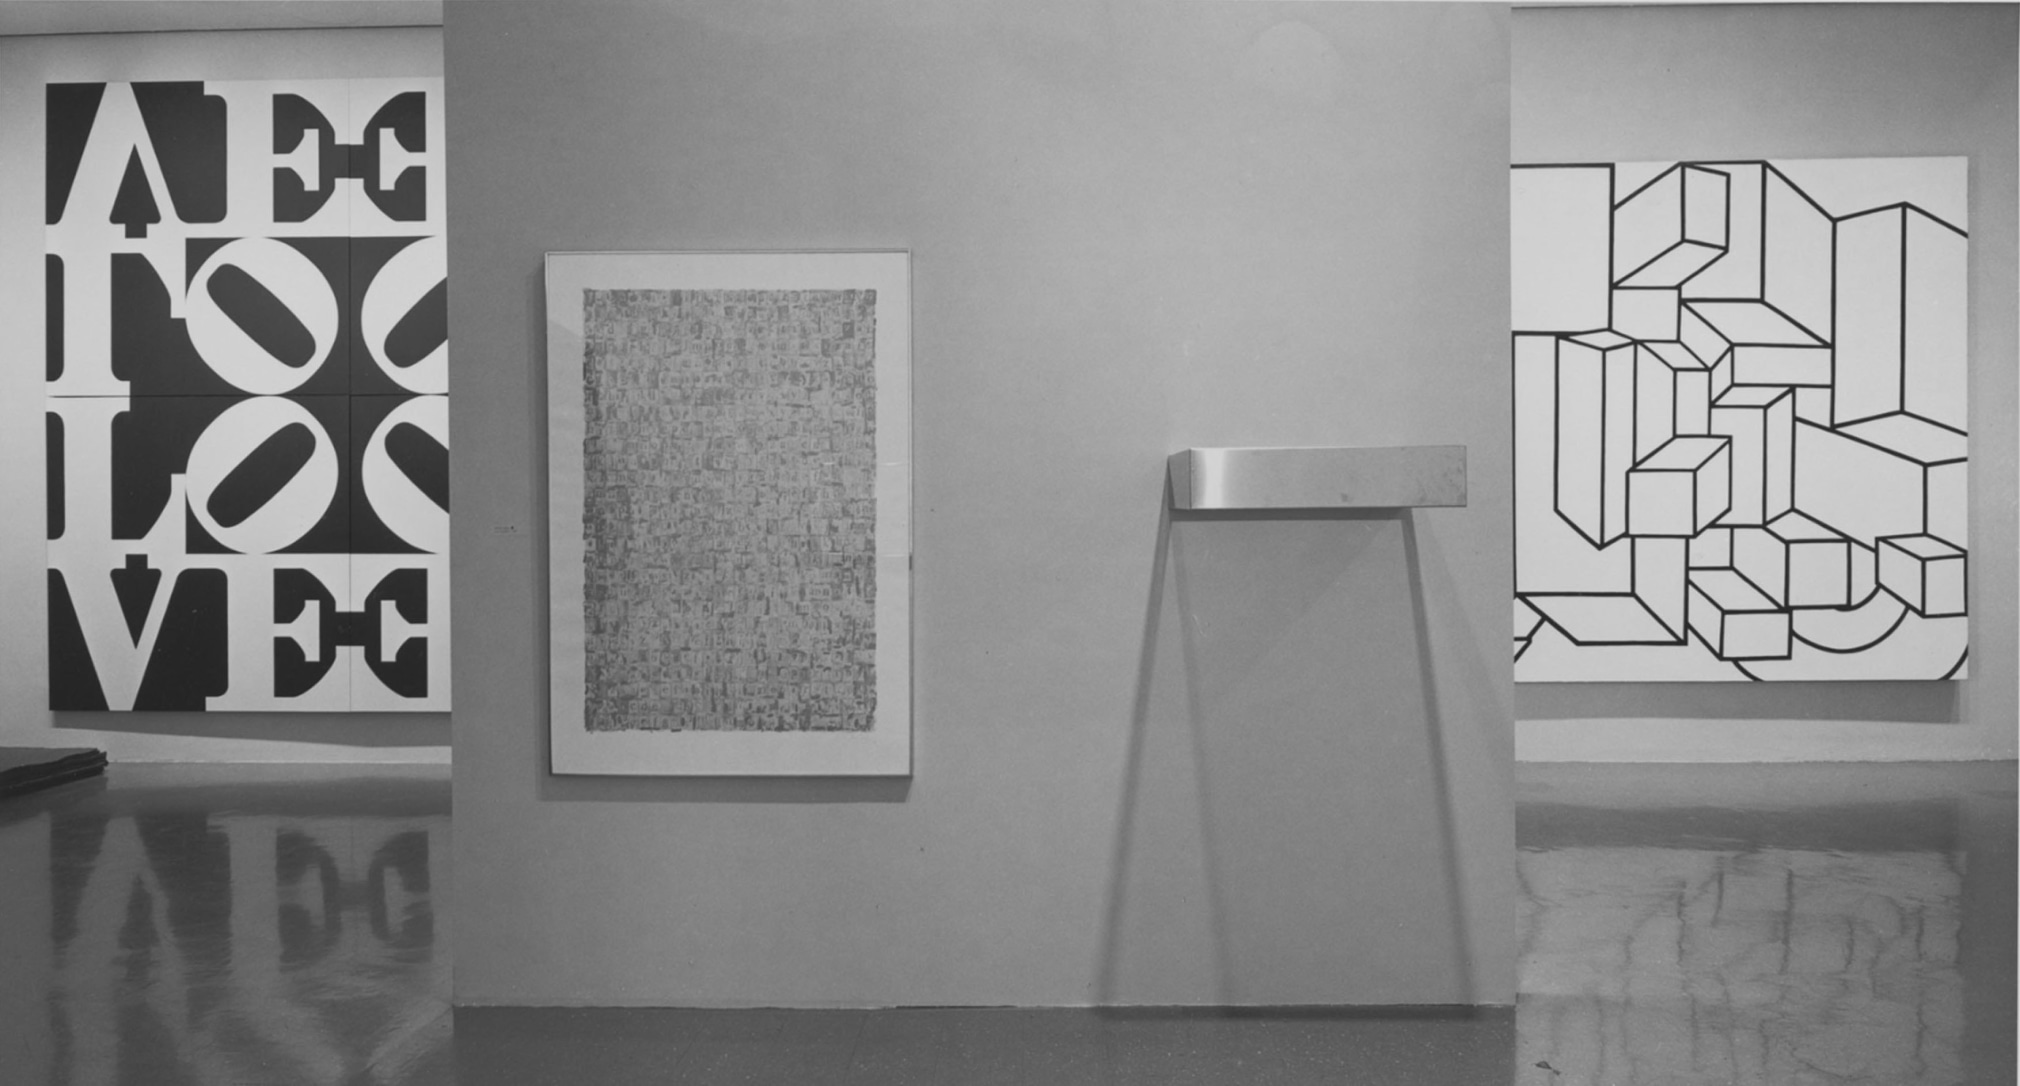 Installation view of the exhibition&nbsp;In Honor of Dr. Martin Luther King, Jr.&nbsp;at the Museum of Modern Art, New York, 1968; left to right, Indiana&rsquo;s Love Rising (The Black and White Love), and works by Jasper Johns, Donald Judd, and Al Held. Image courtesy of the Museum of Modern Art, New York